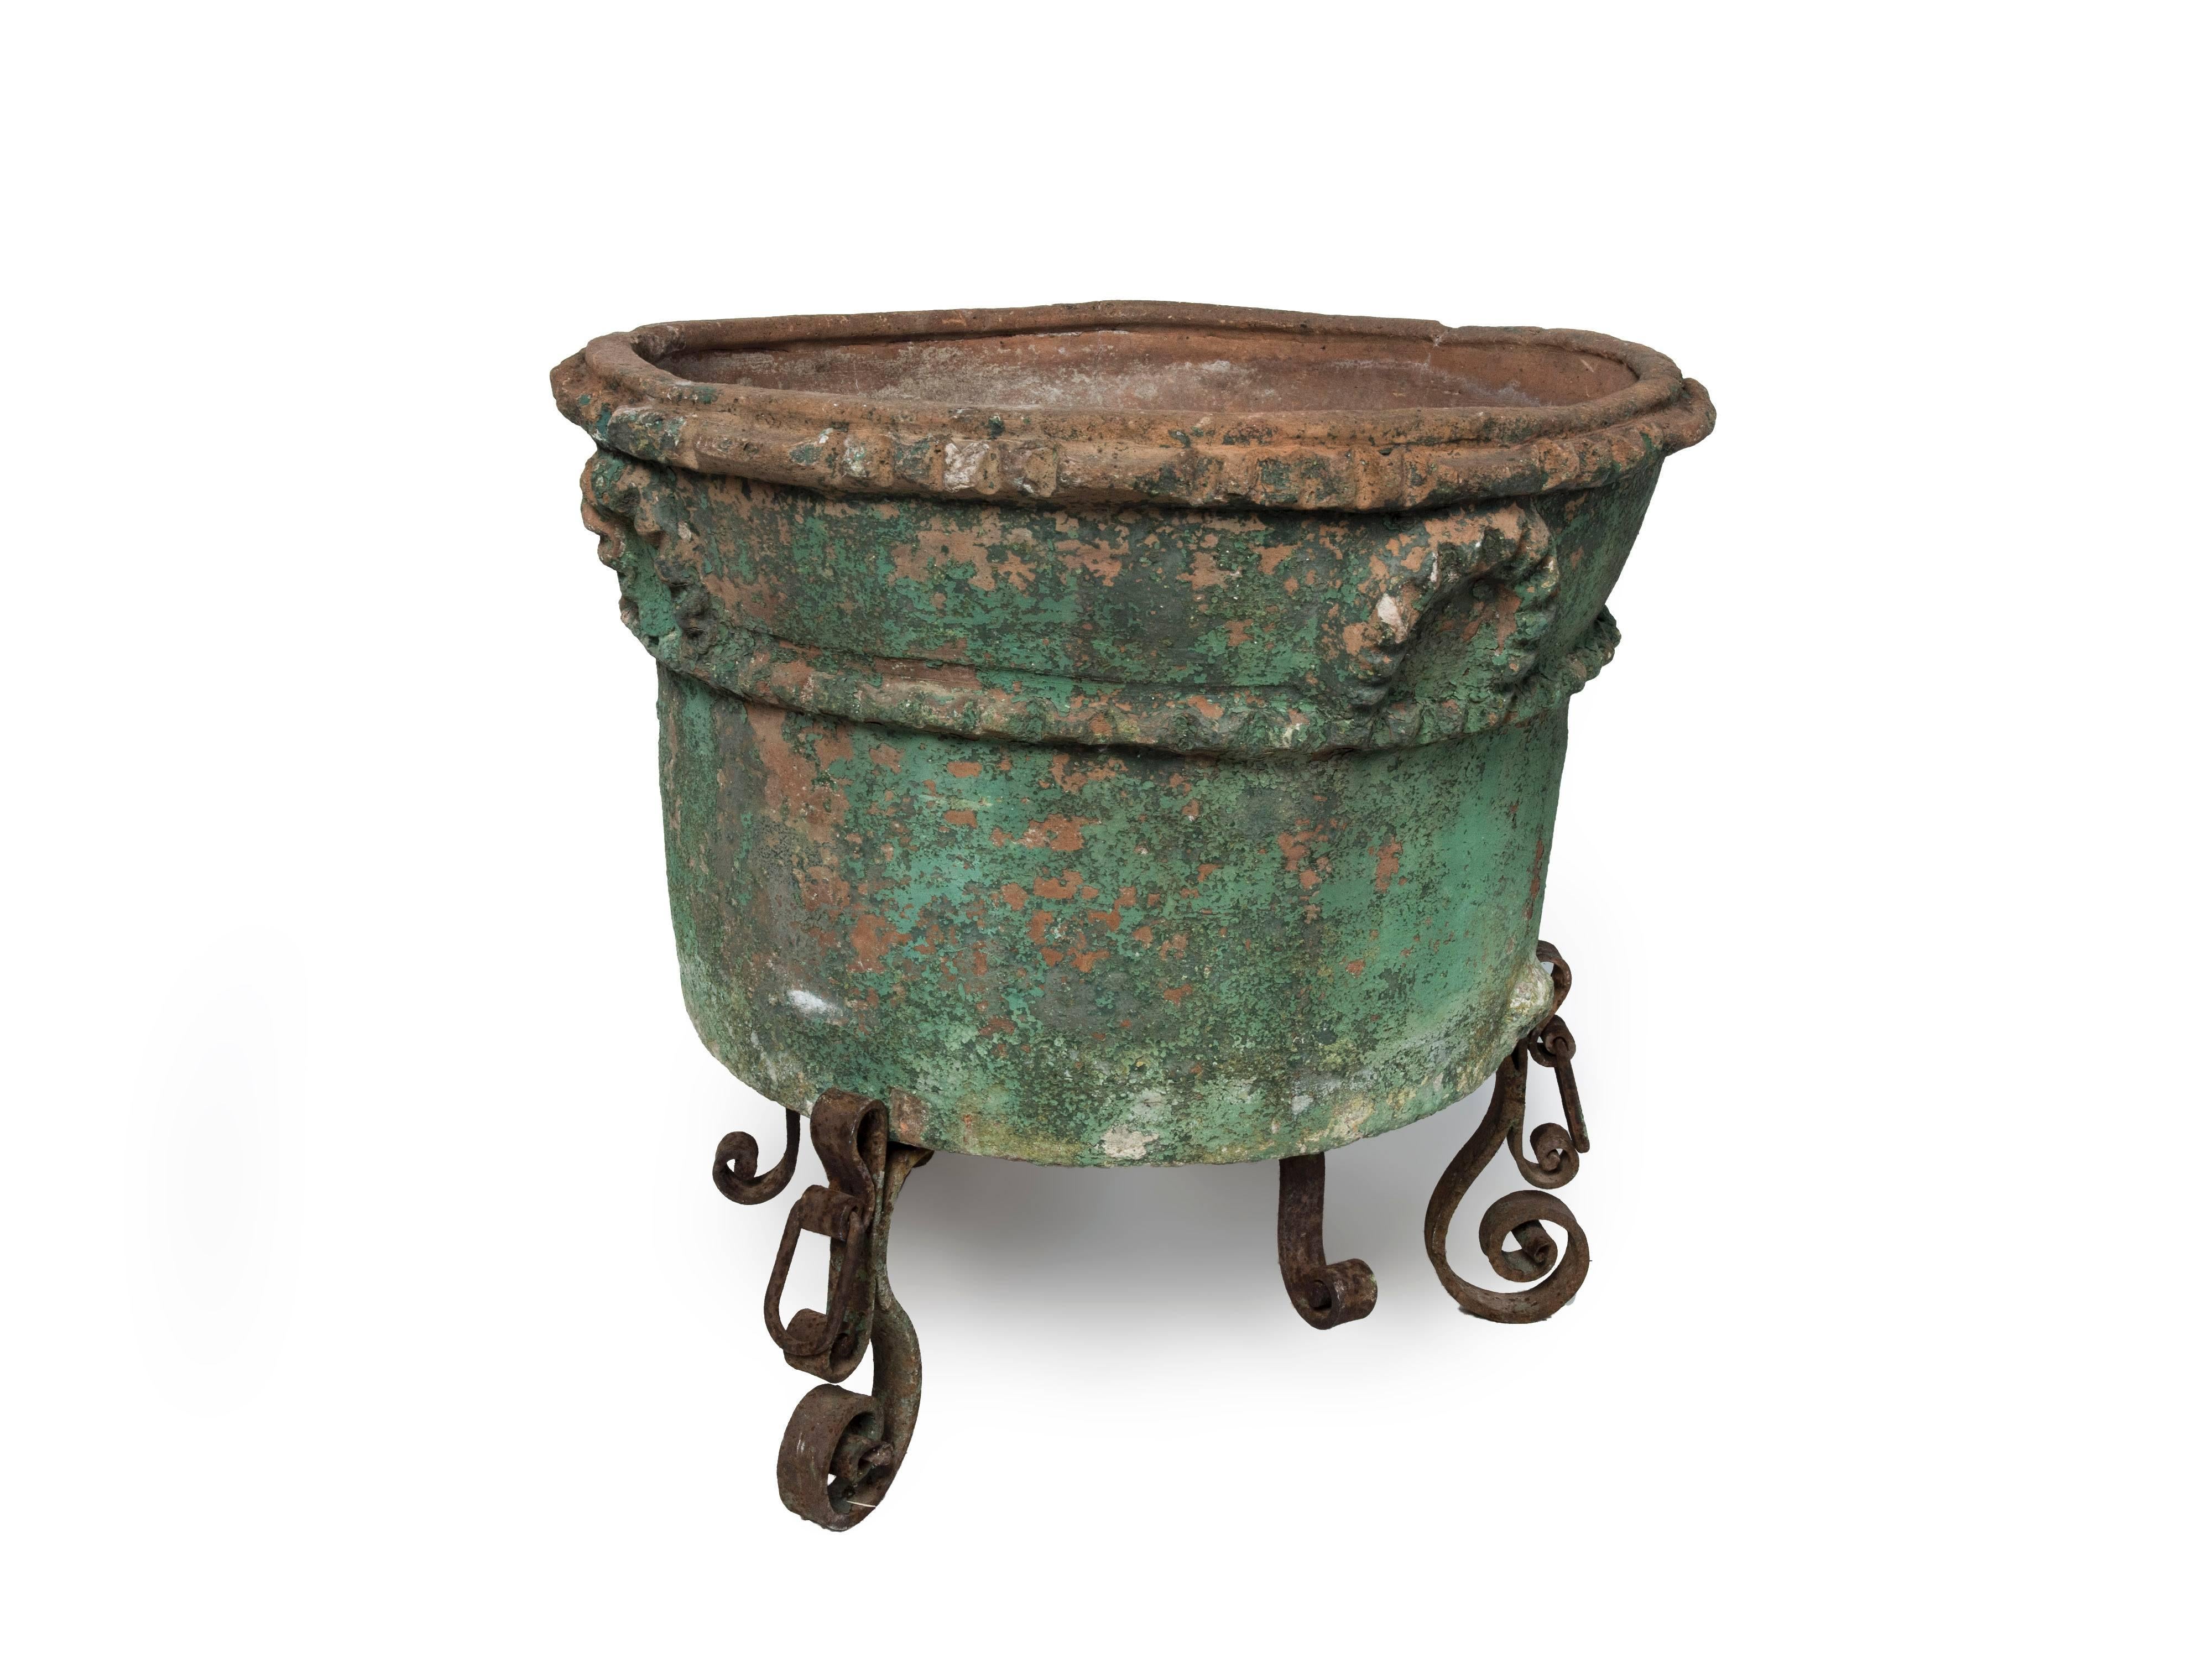 Large painted terra cotta planter with a wrought iron stand.